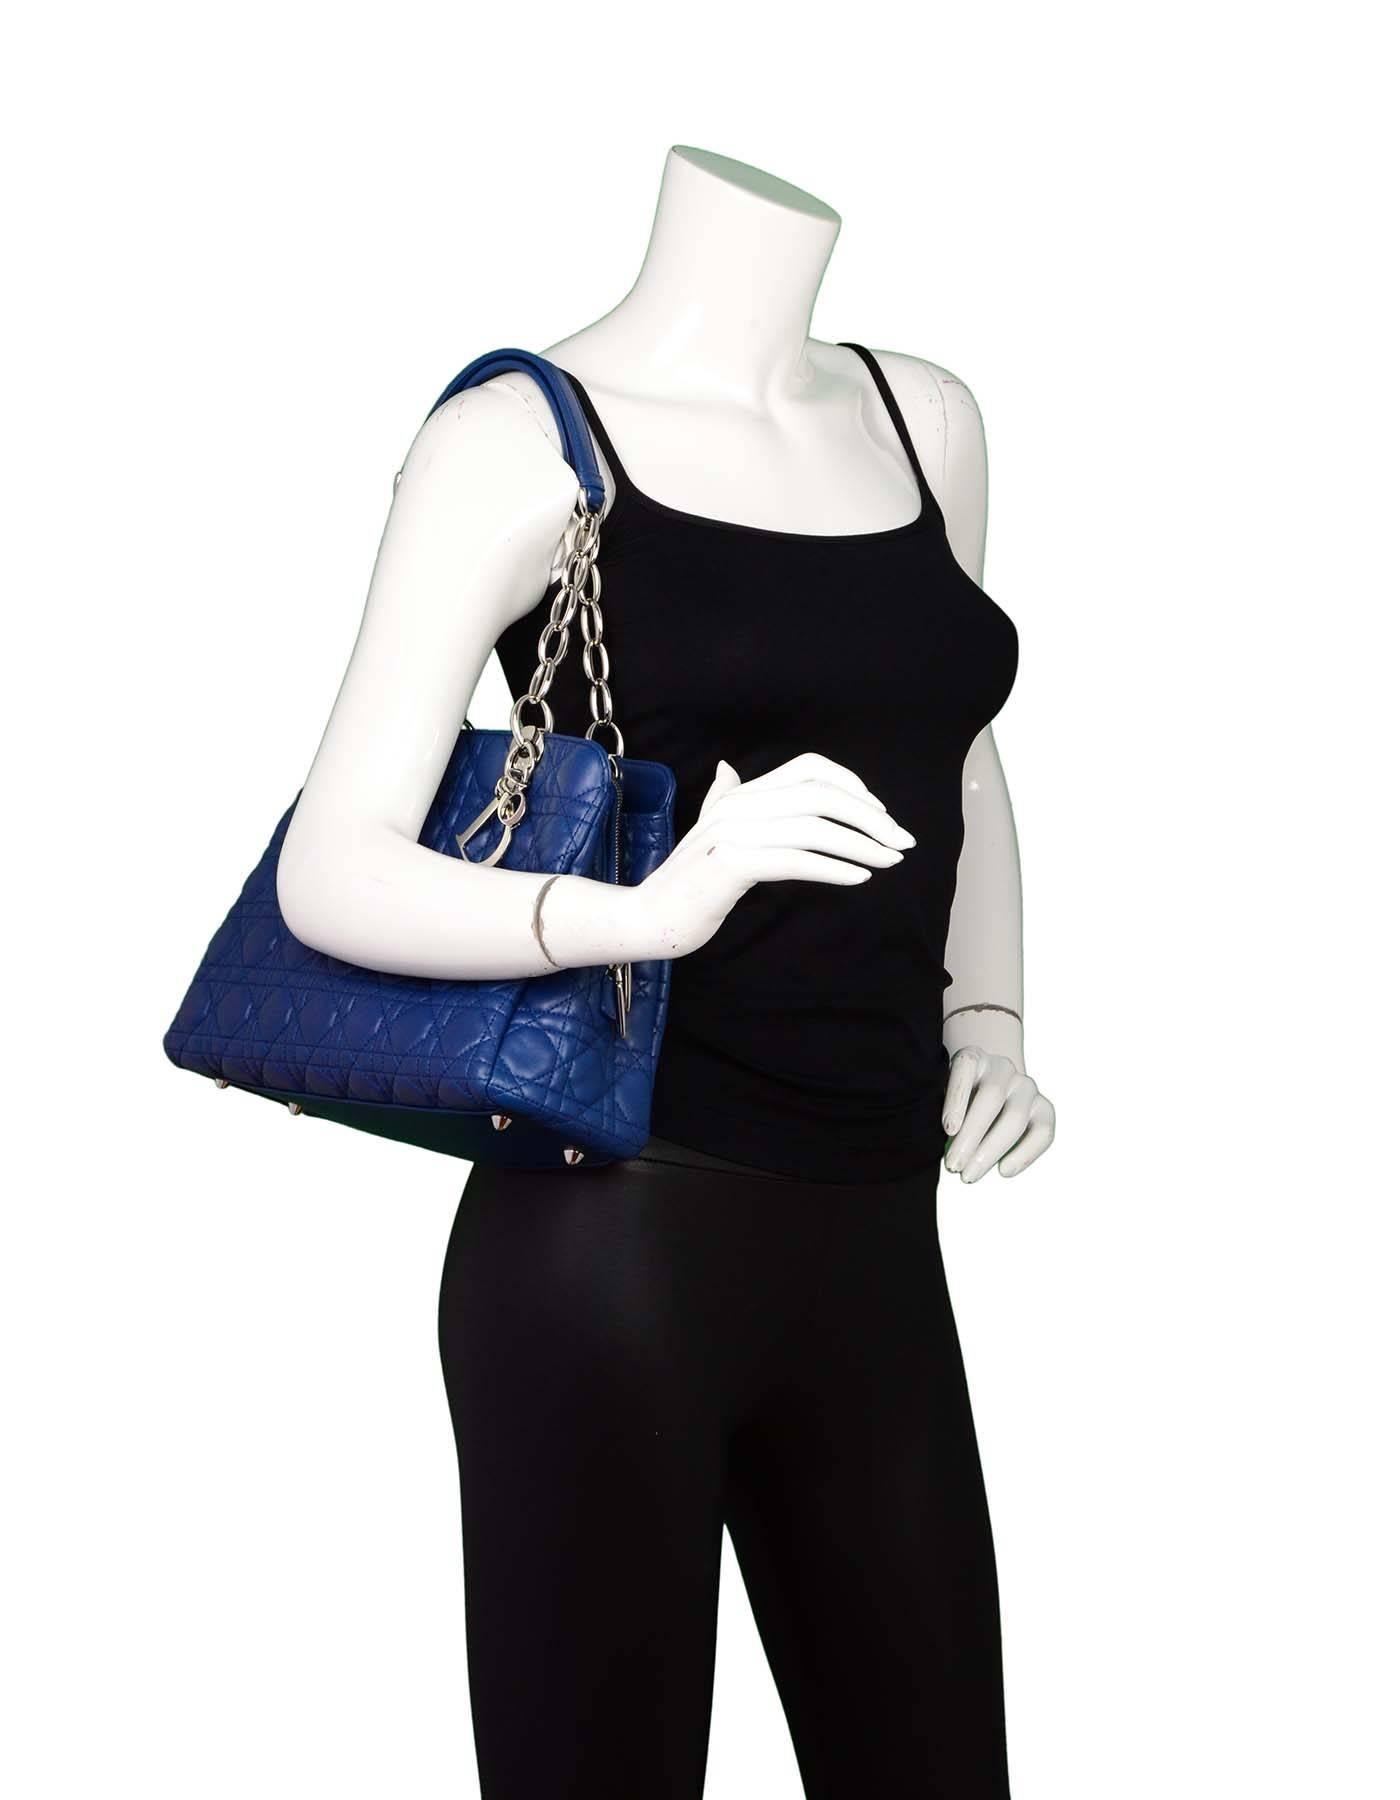 Christian Dior Marine Blue Soft Leather Zipper Shopping Tote
Features quilting throughout and Dior charms

Made In: Italy
Color: Marine blue
Materials: Leather, metal
Opening: Zip top
Exterior Pockets: Front and back
Interior Pockets: Two